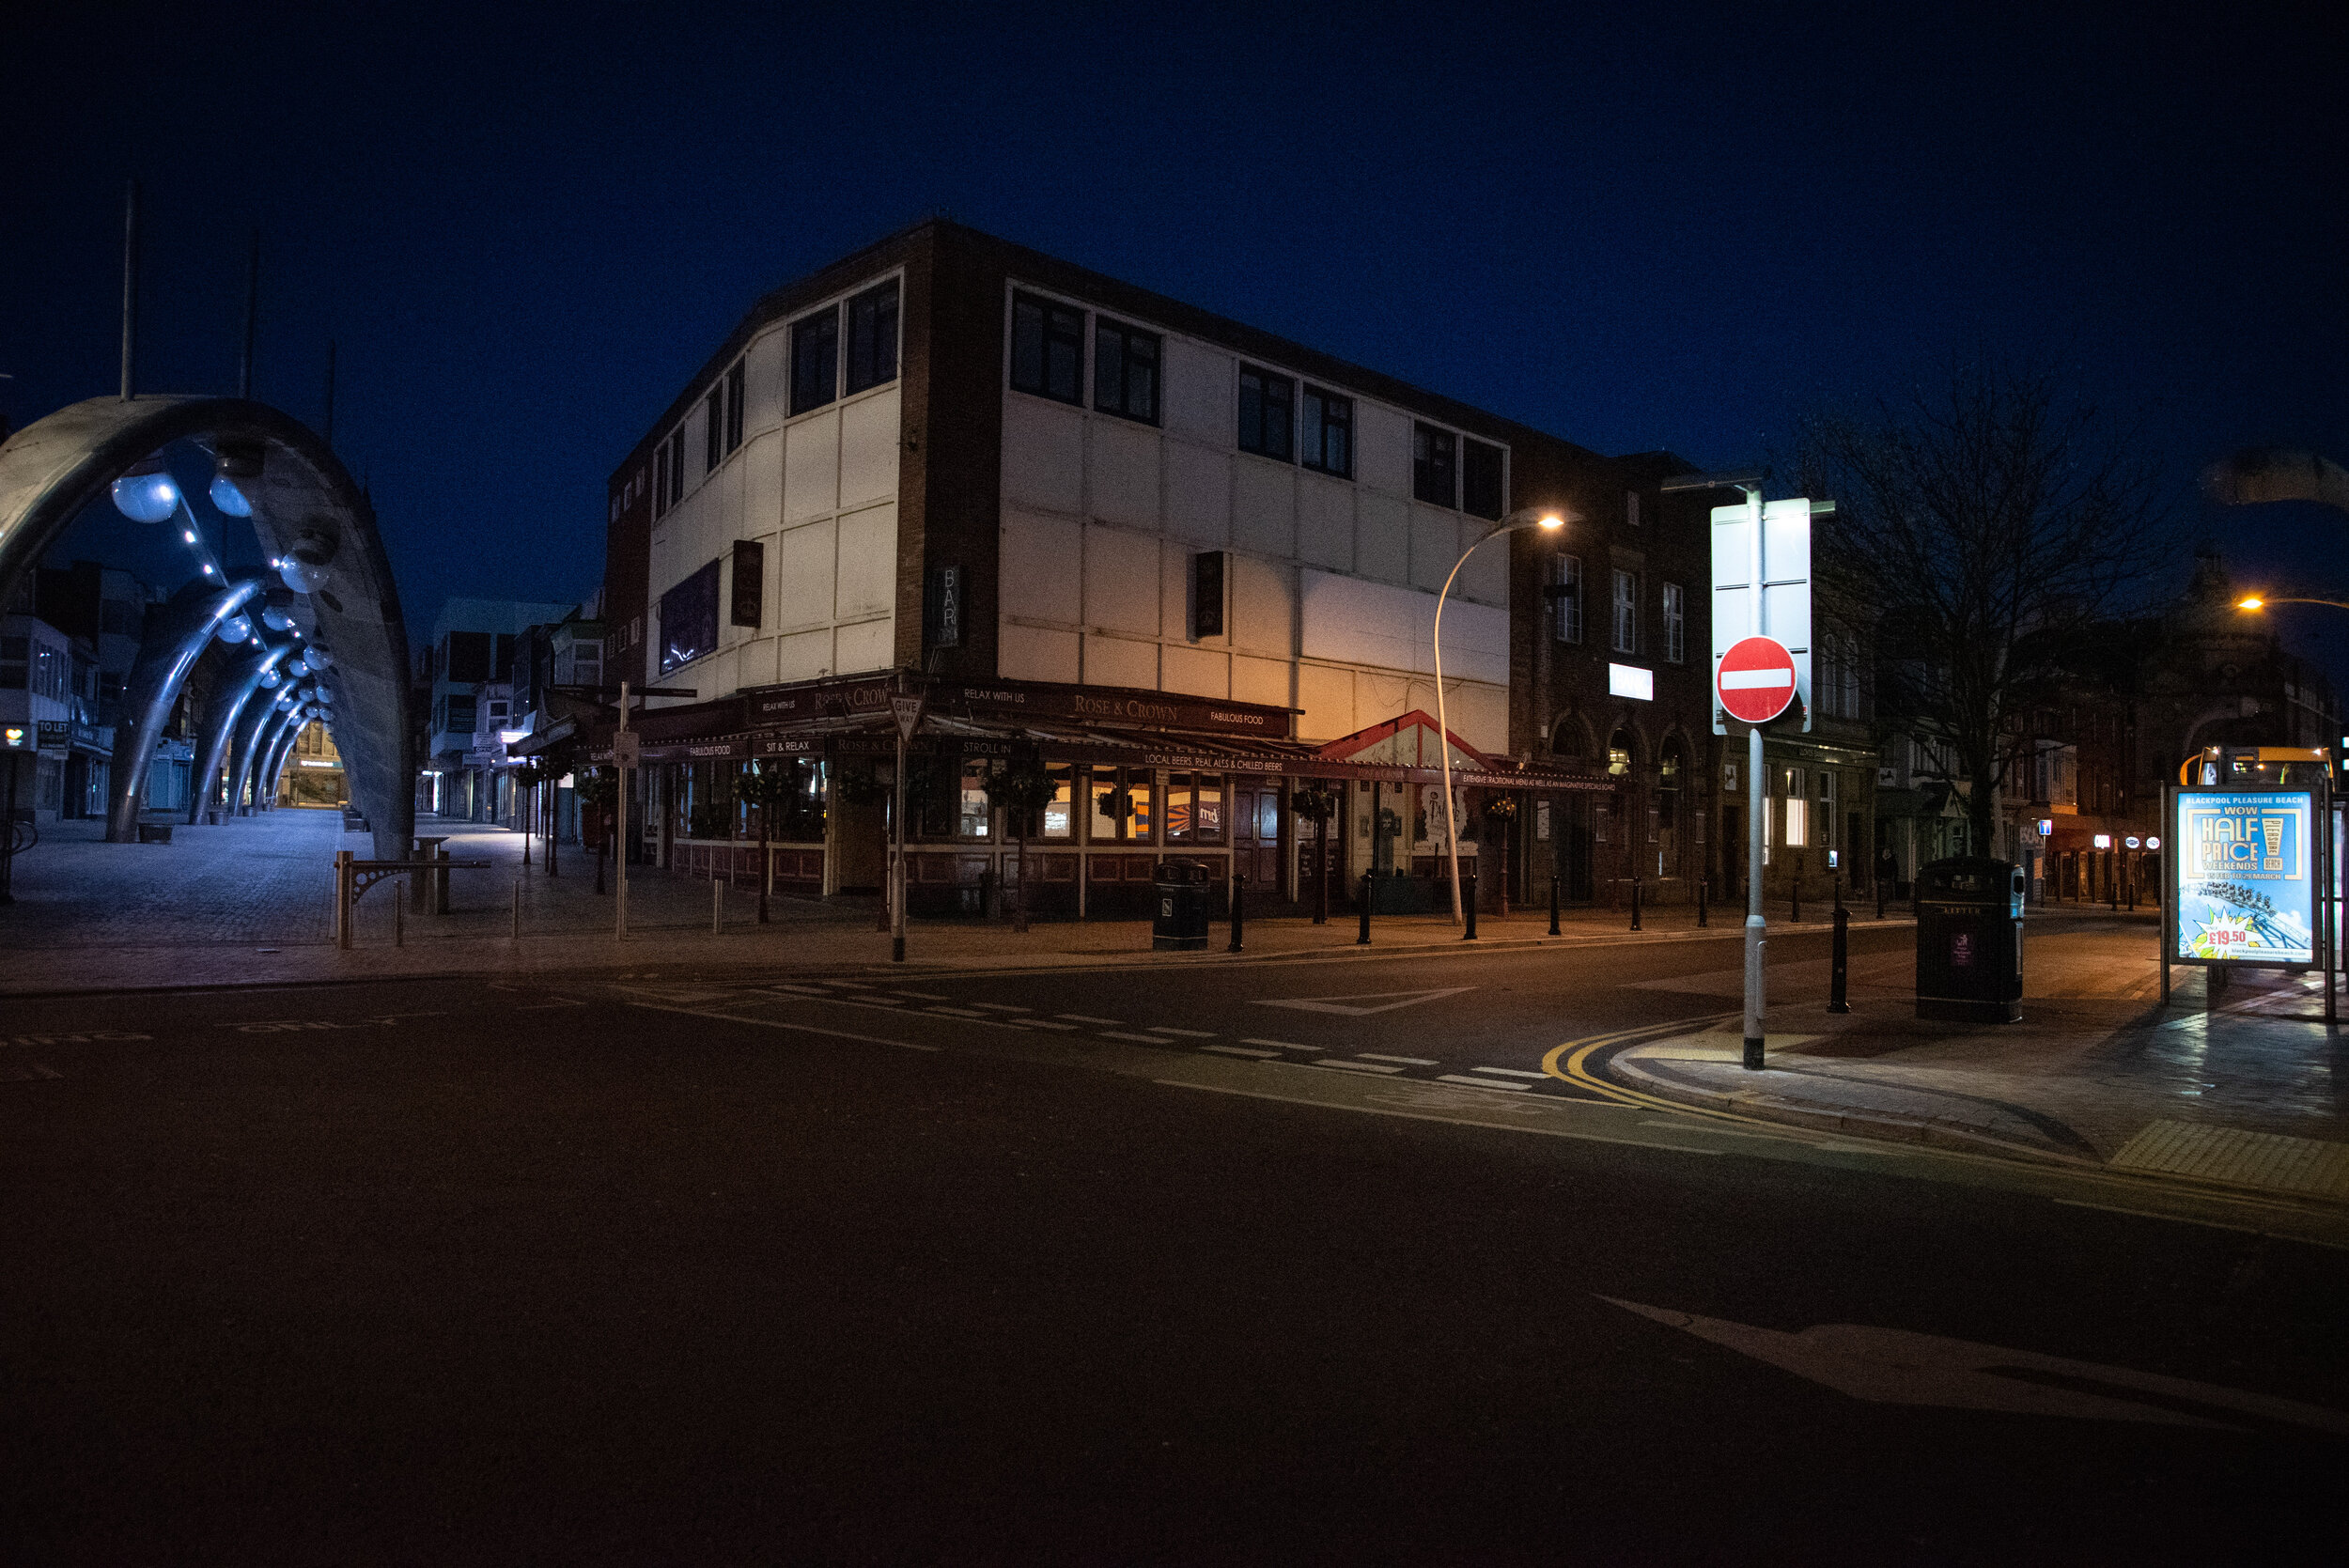 Claire Griffiths April Lockdown 2020 - Pubs in Lockdown and Night Time Blackpool (8).jpg